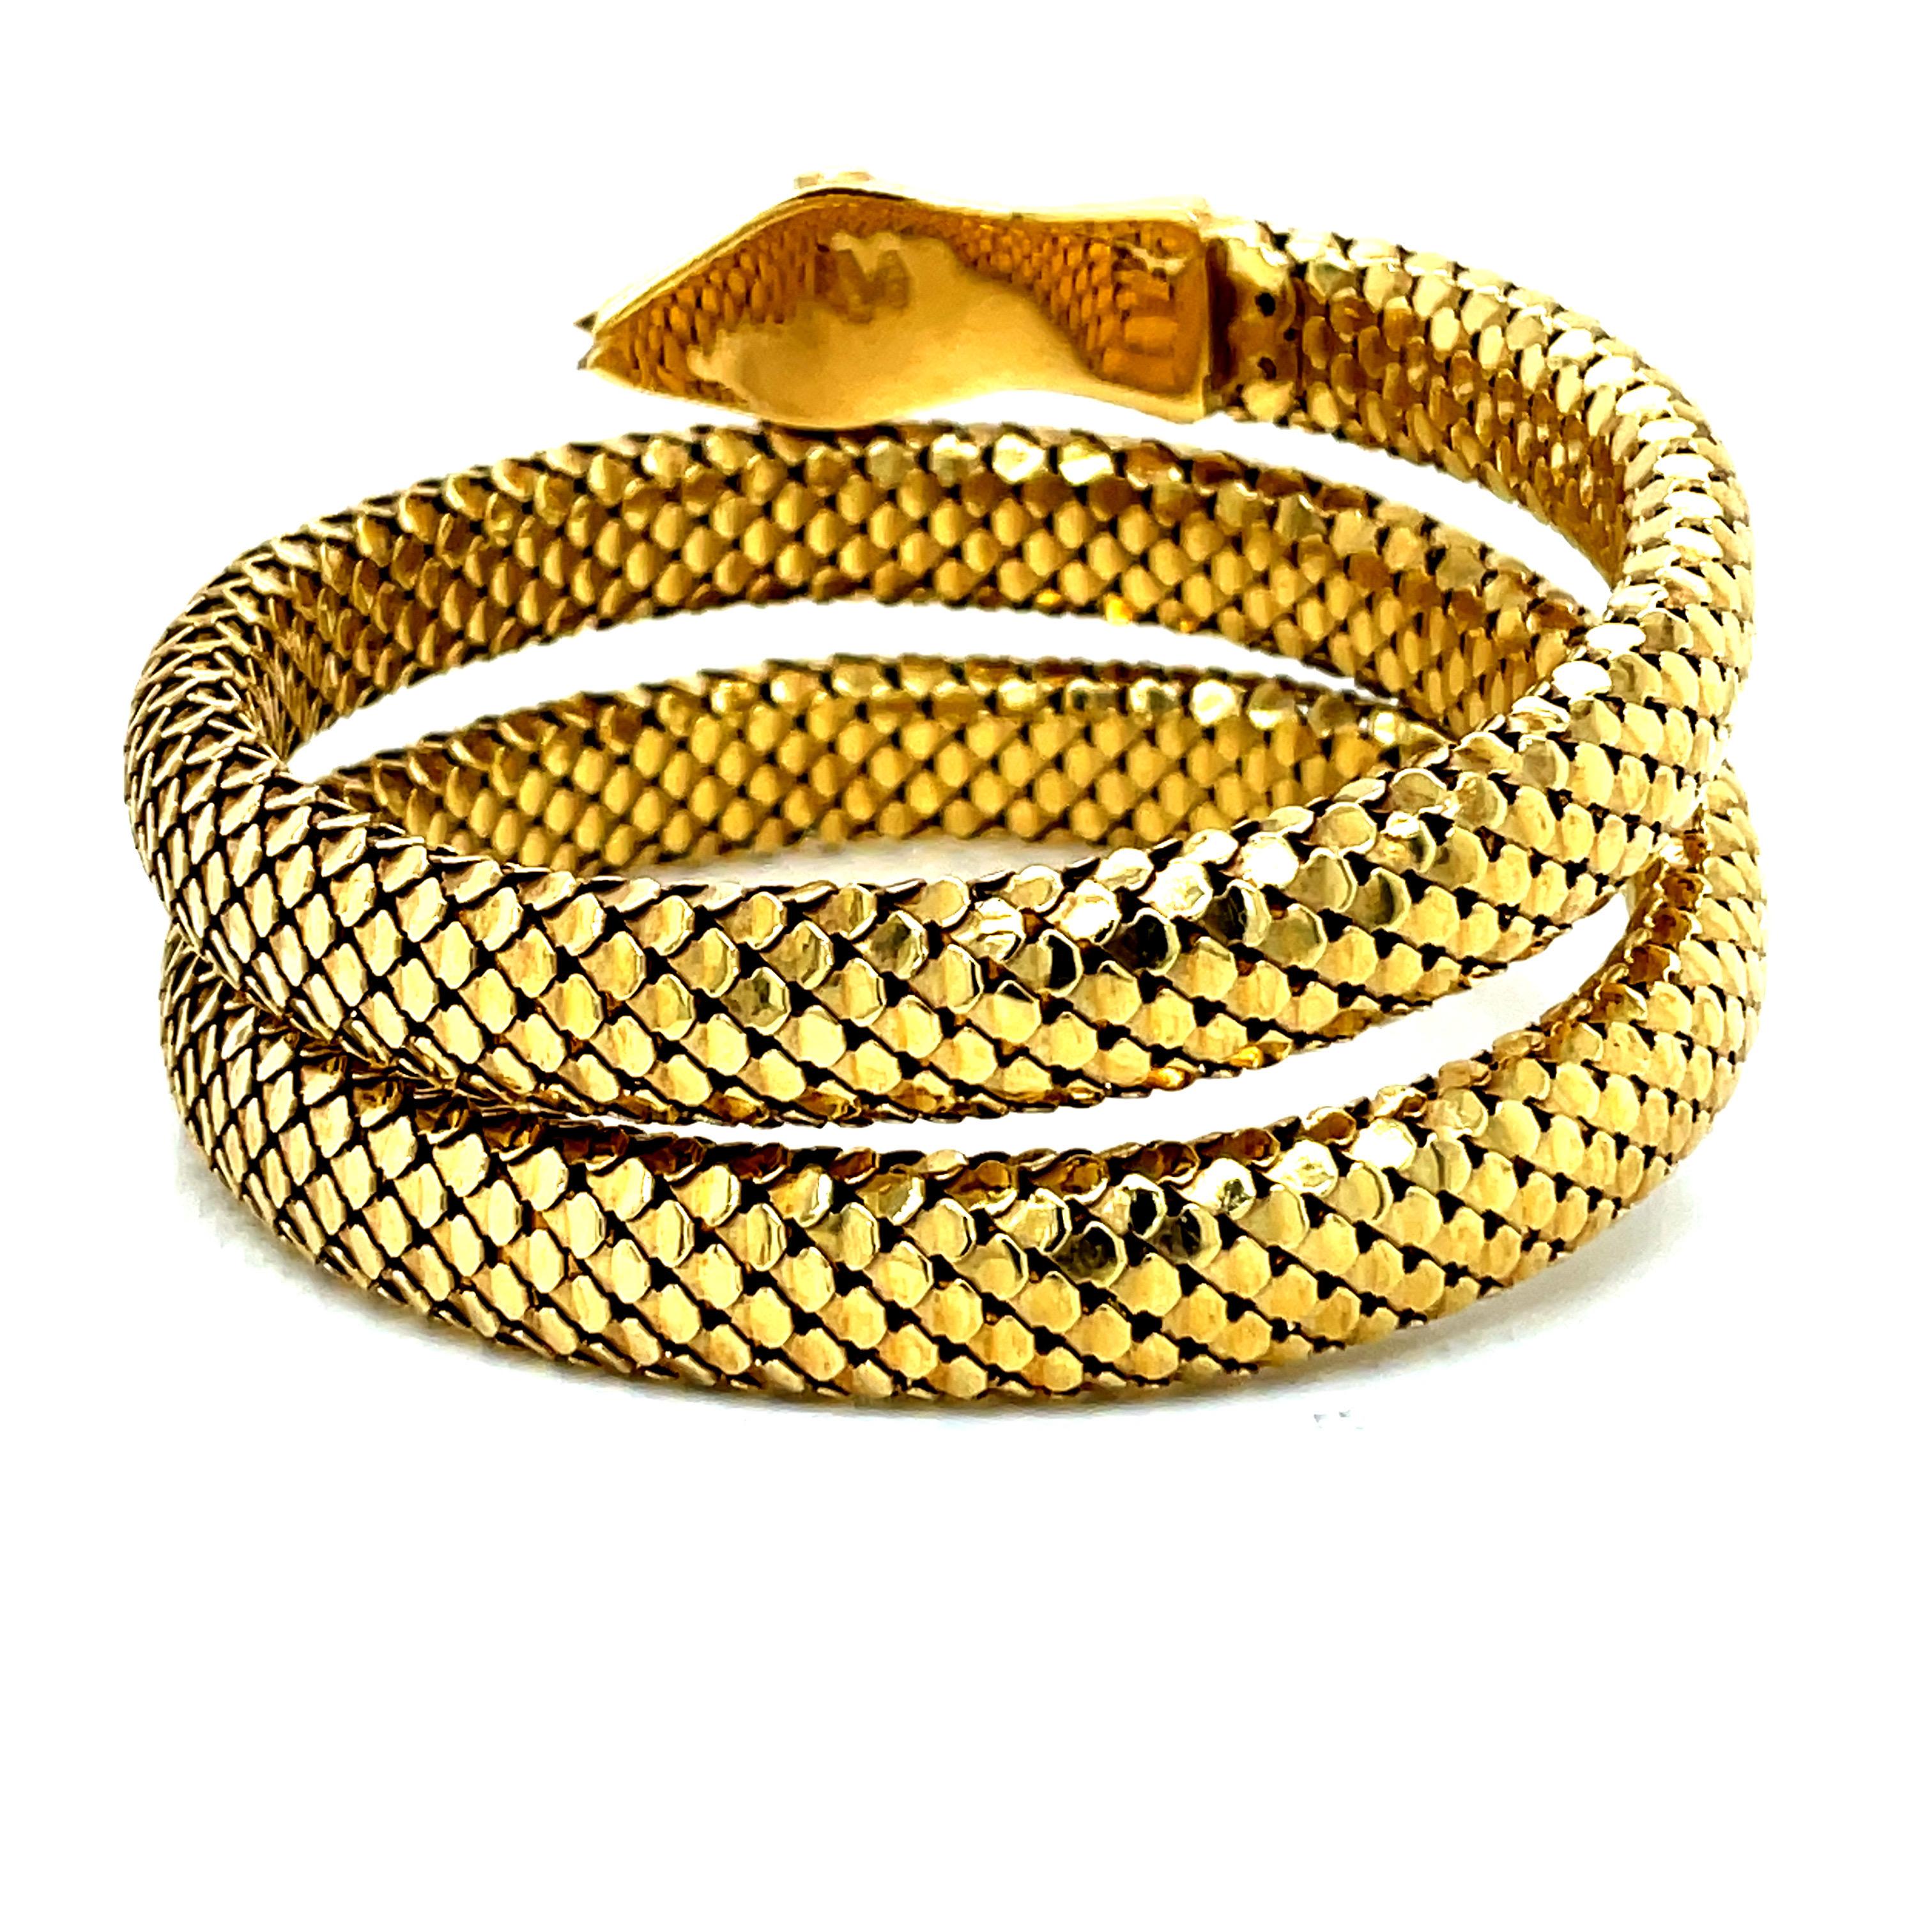 Vintage 1980s 18k Yellow Gold Snake Bracelet and Arm Band For Sale 1